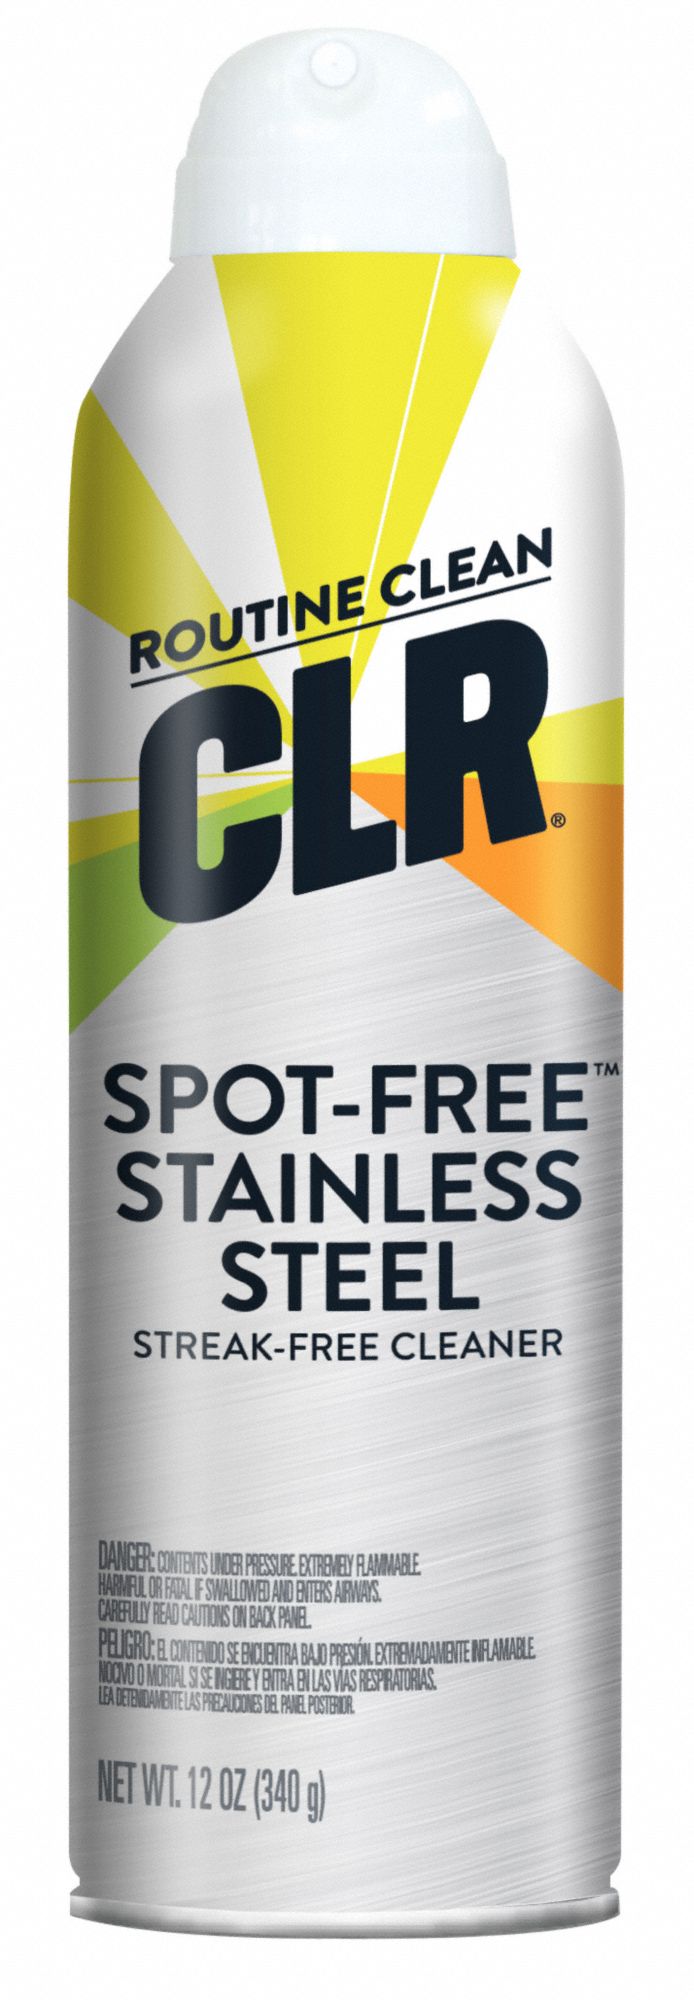 Stainless Steel Cleaner: Aerosol Spray Can, 12 oz Container Size, Ready to Use, Liquid